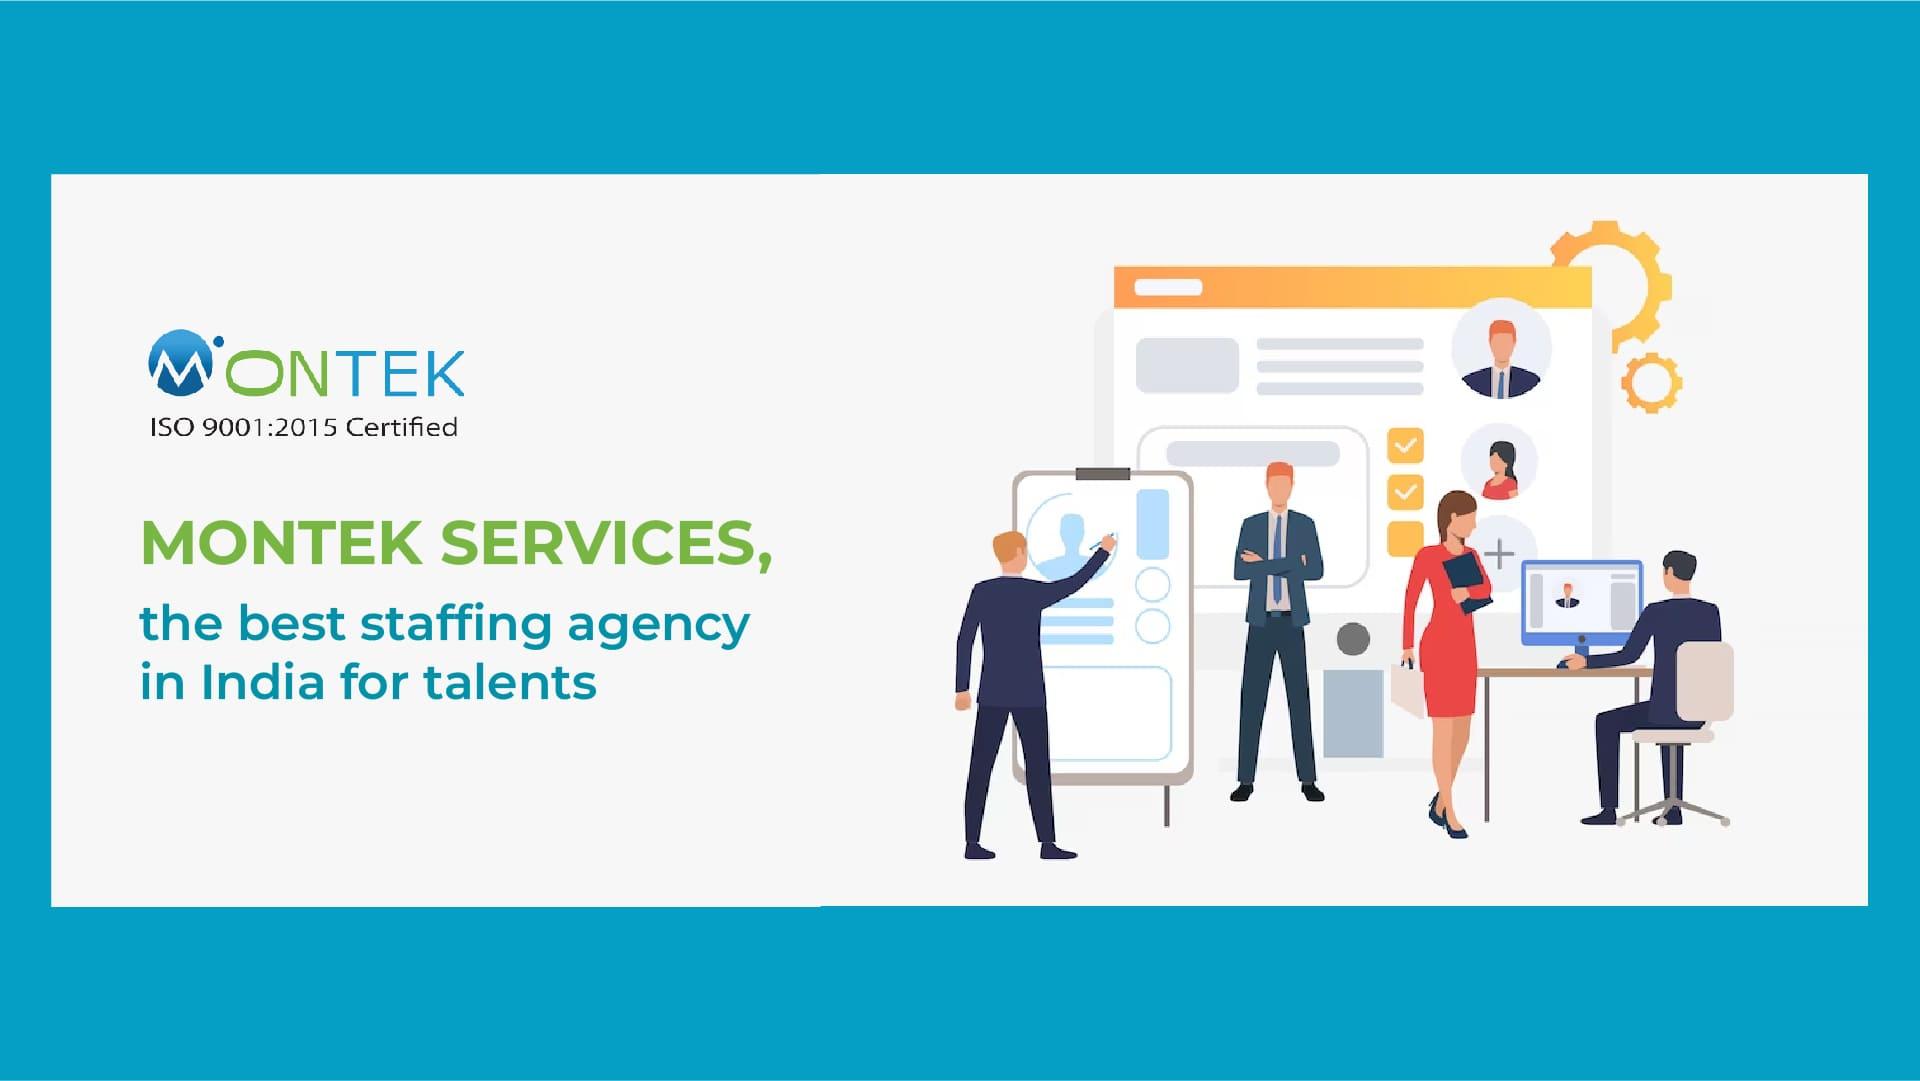 montek-services-the-best-staffing-agency-in-india-for-talents-